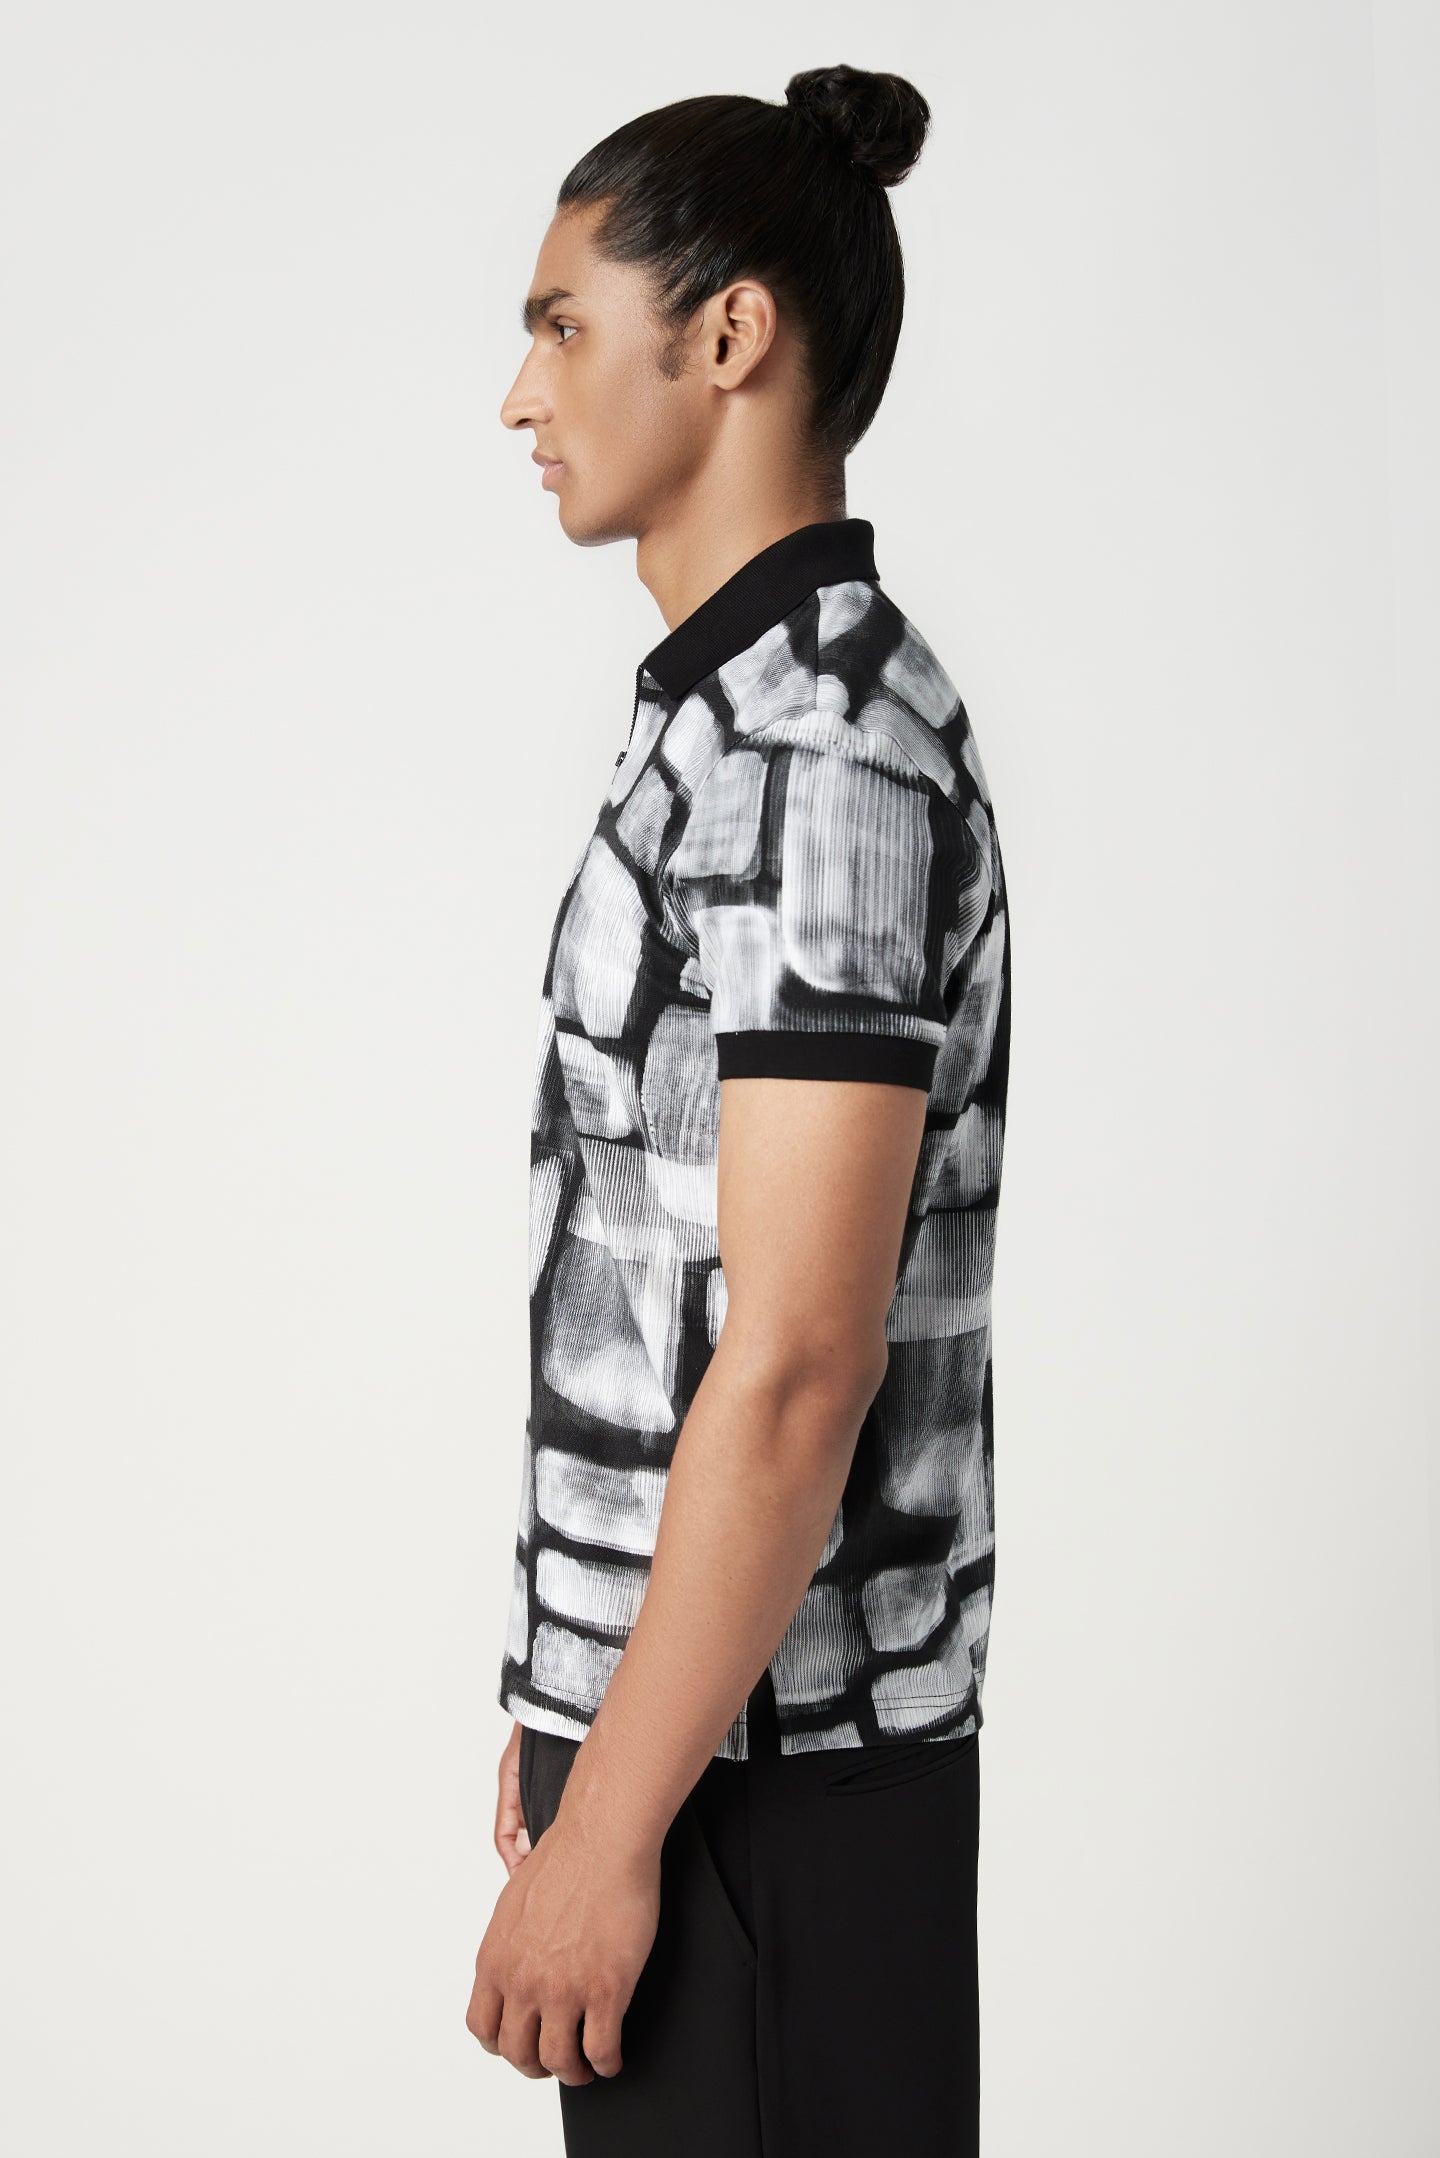 Regular Fit Polo T-Shirt with All-Over Abstract Check Print